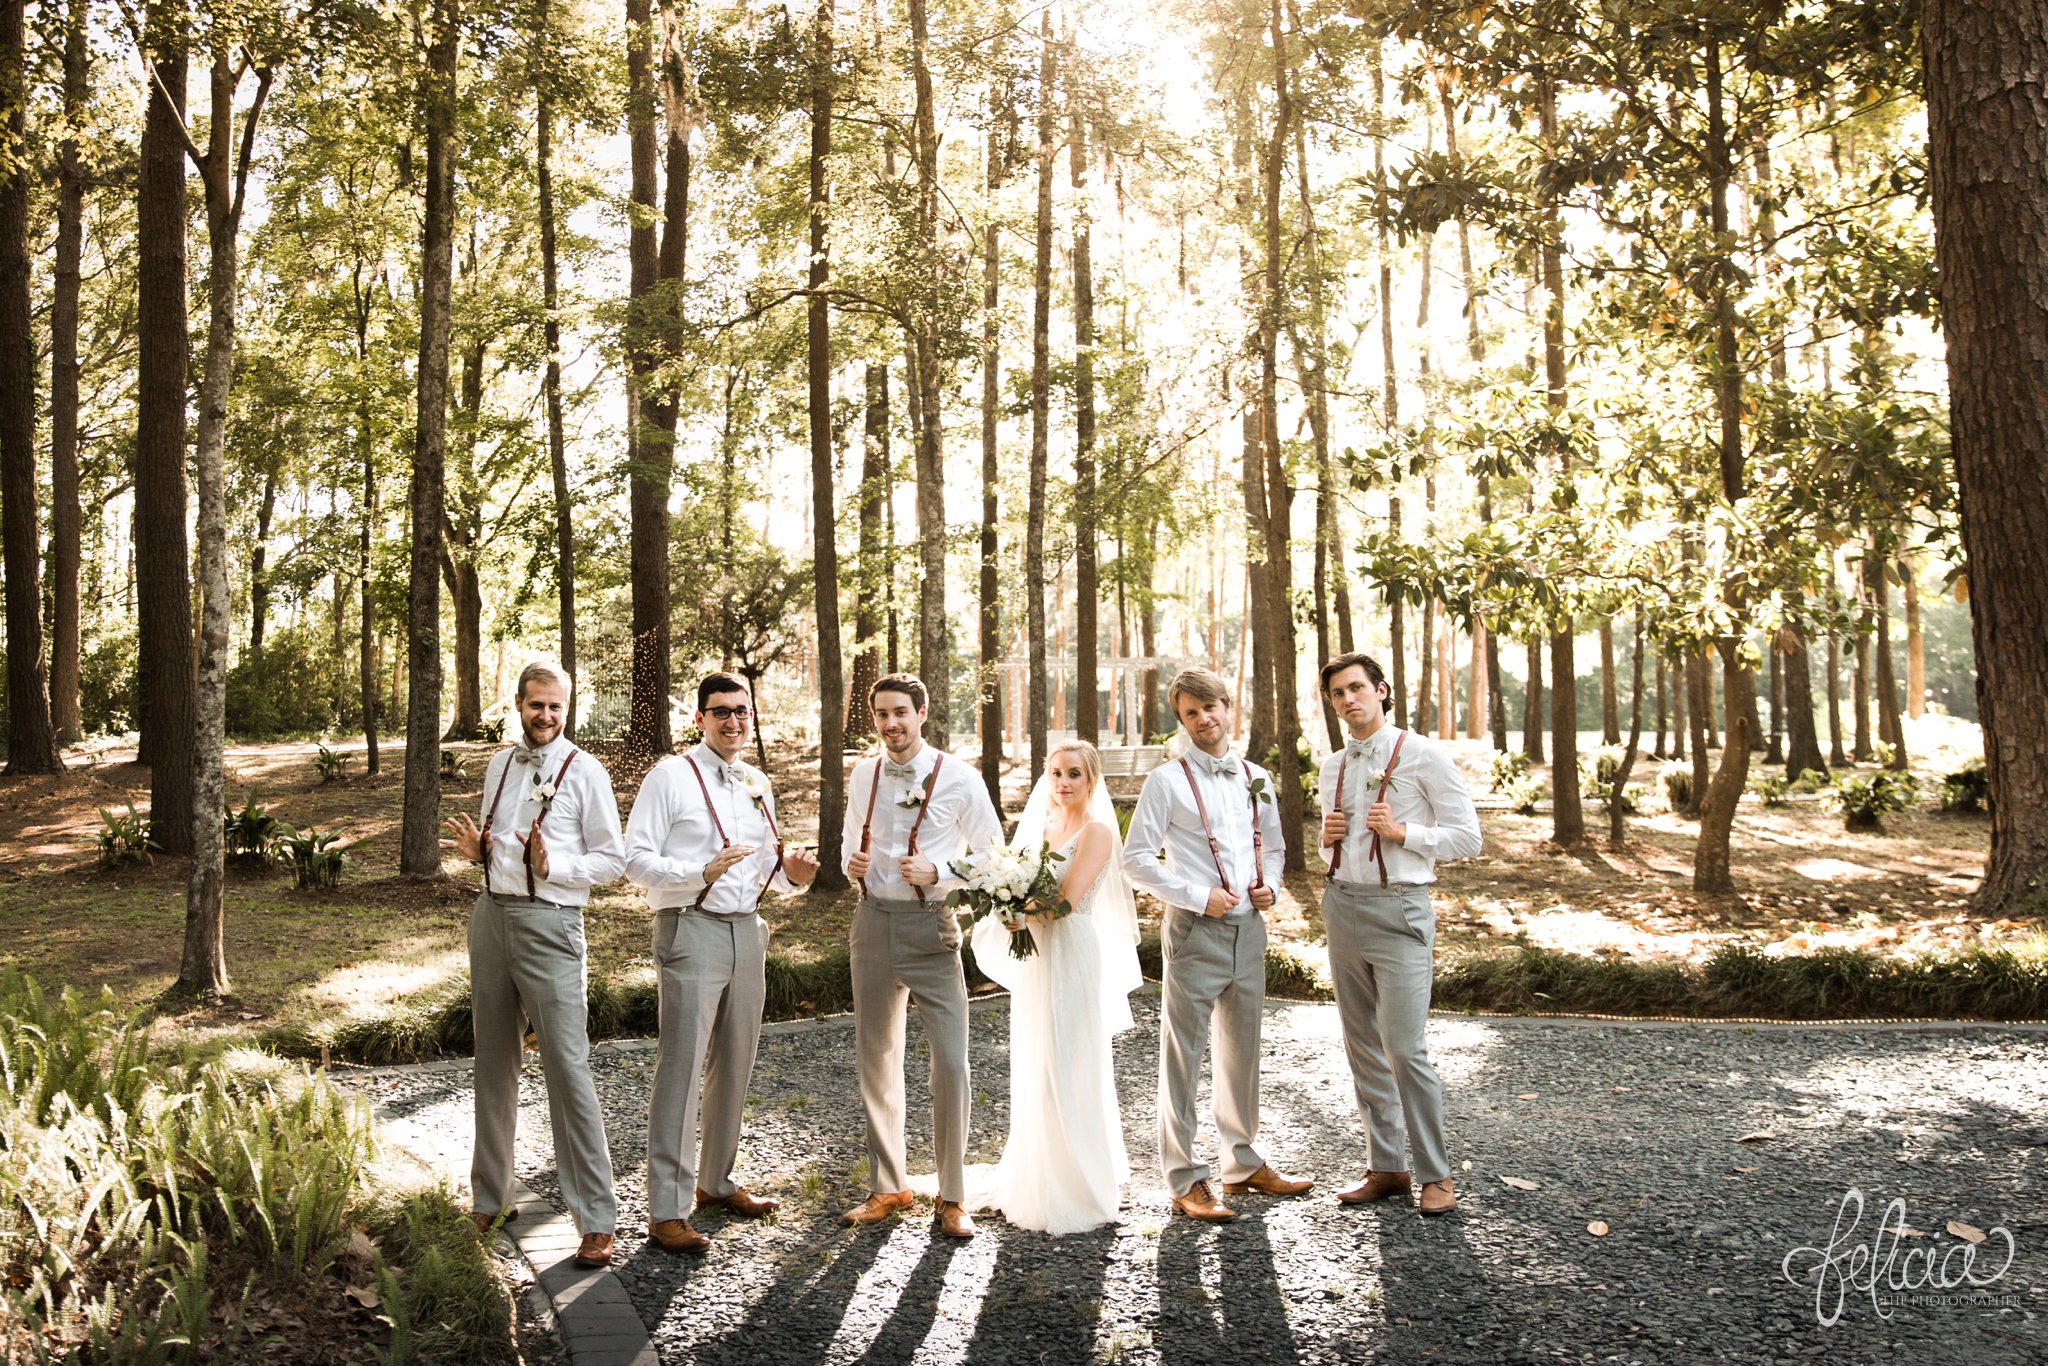 images by feliciathephotographer.com | destination wedding | the makey house | dave gibson coordinator | travel photographer | Savannah, georgia | southern | bride | groomsmen | snapping suspenders | trees | forest | green | lace dress |